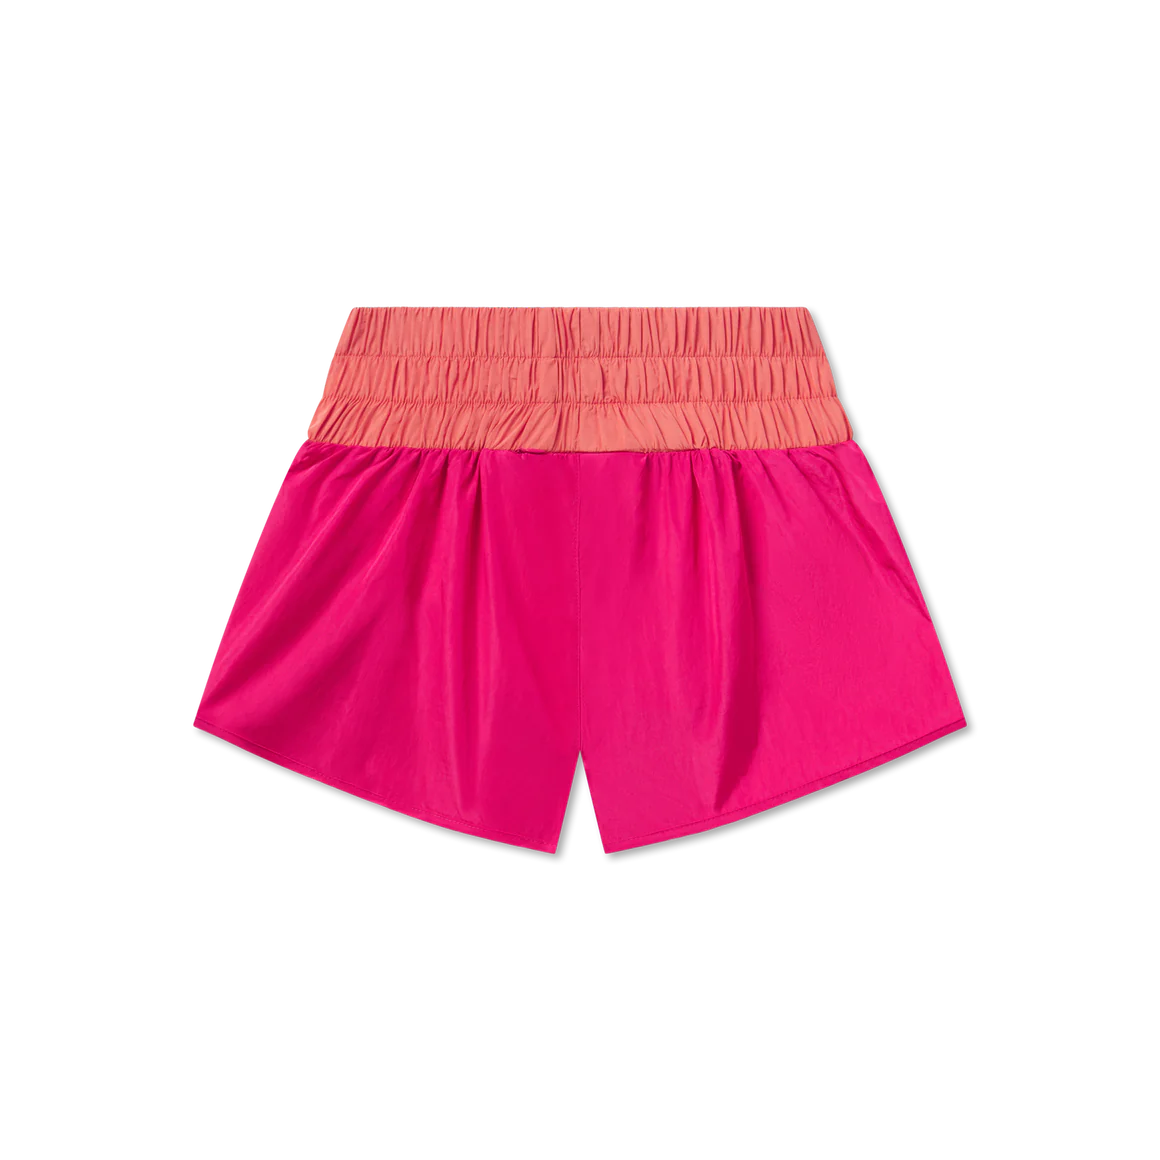 Lele Performance Shorts in Pink & Coral